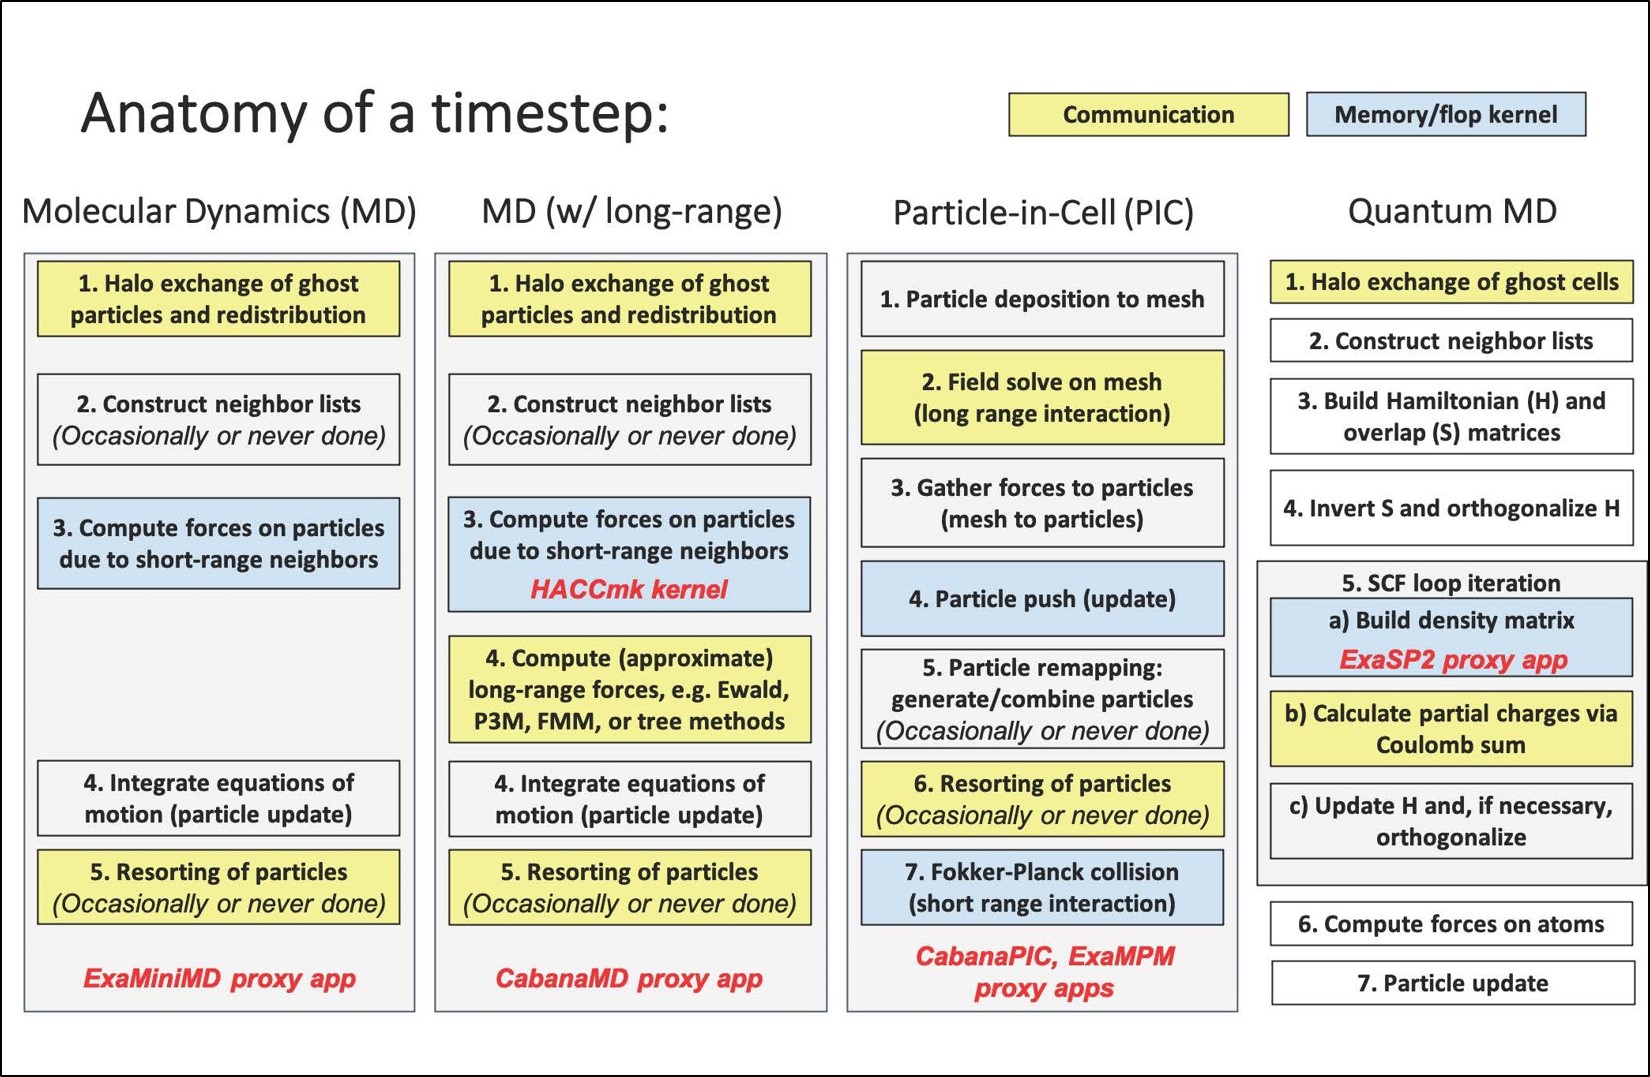 Anatomy of a time step is shown for each of the particle application submotifs